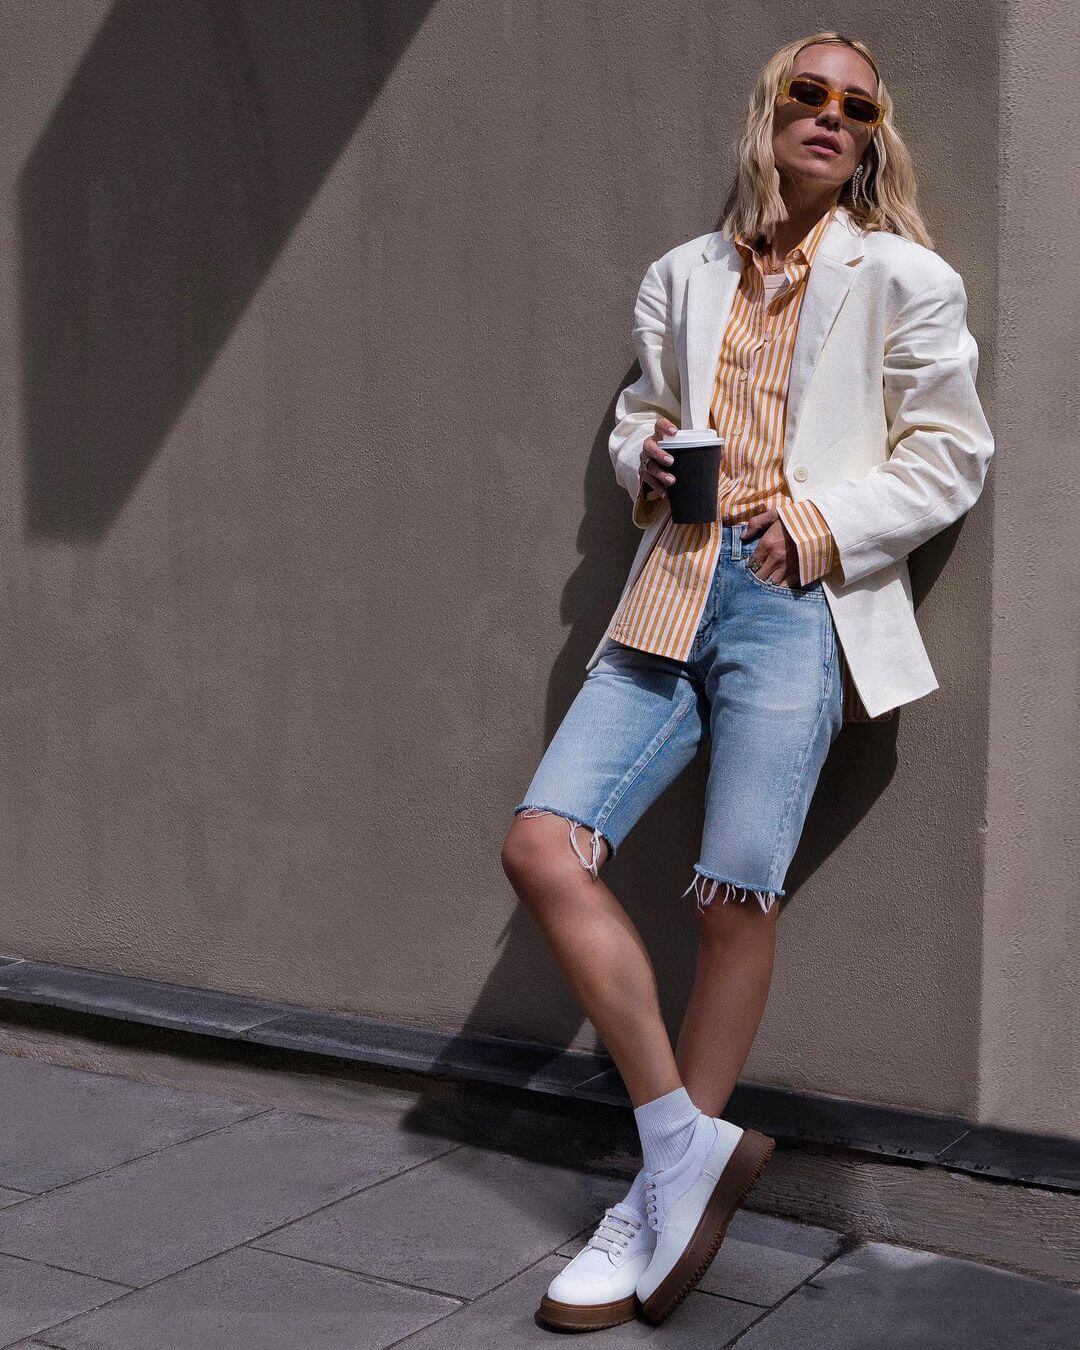 10 Stylish Spring Outfits You Can Wear With Jeans